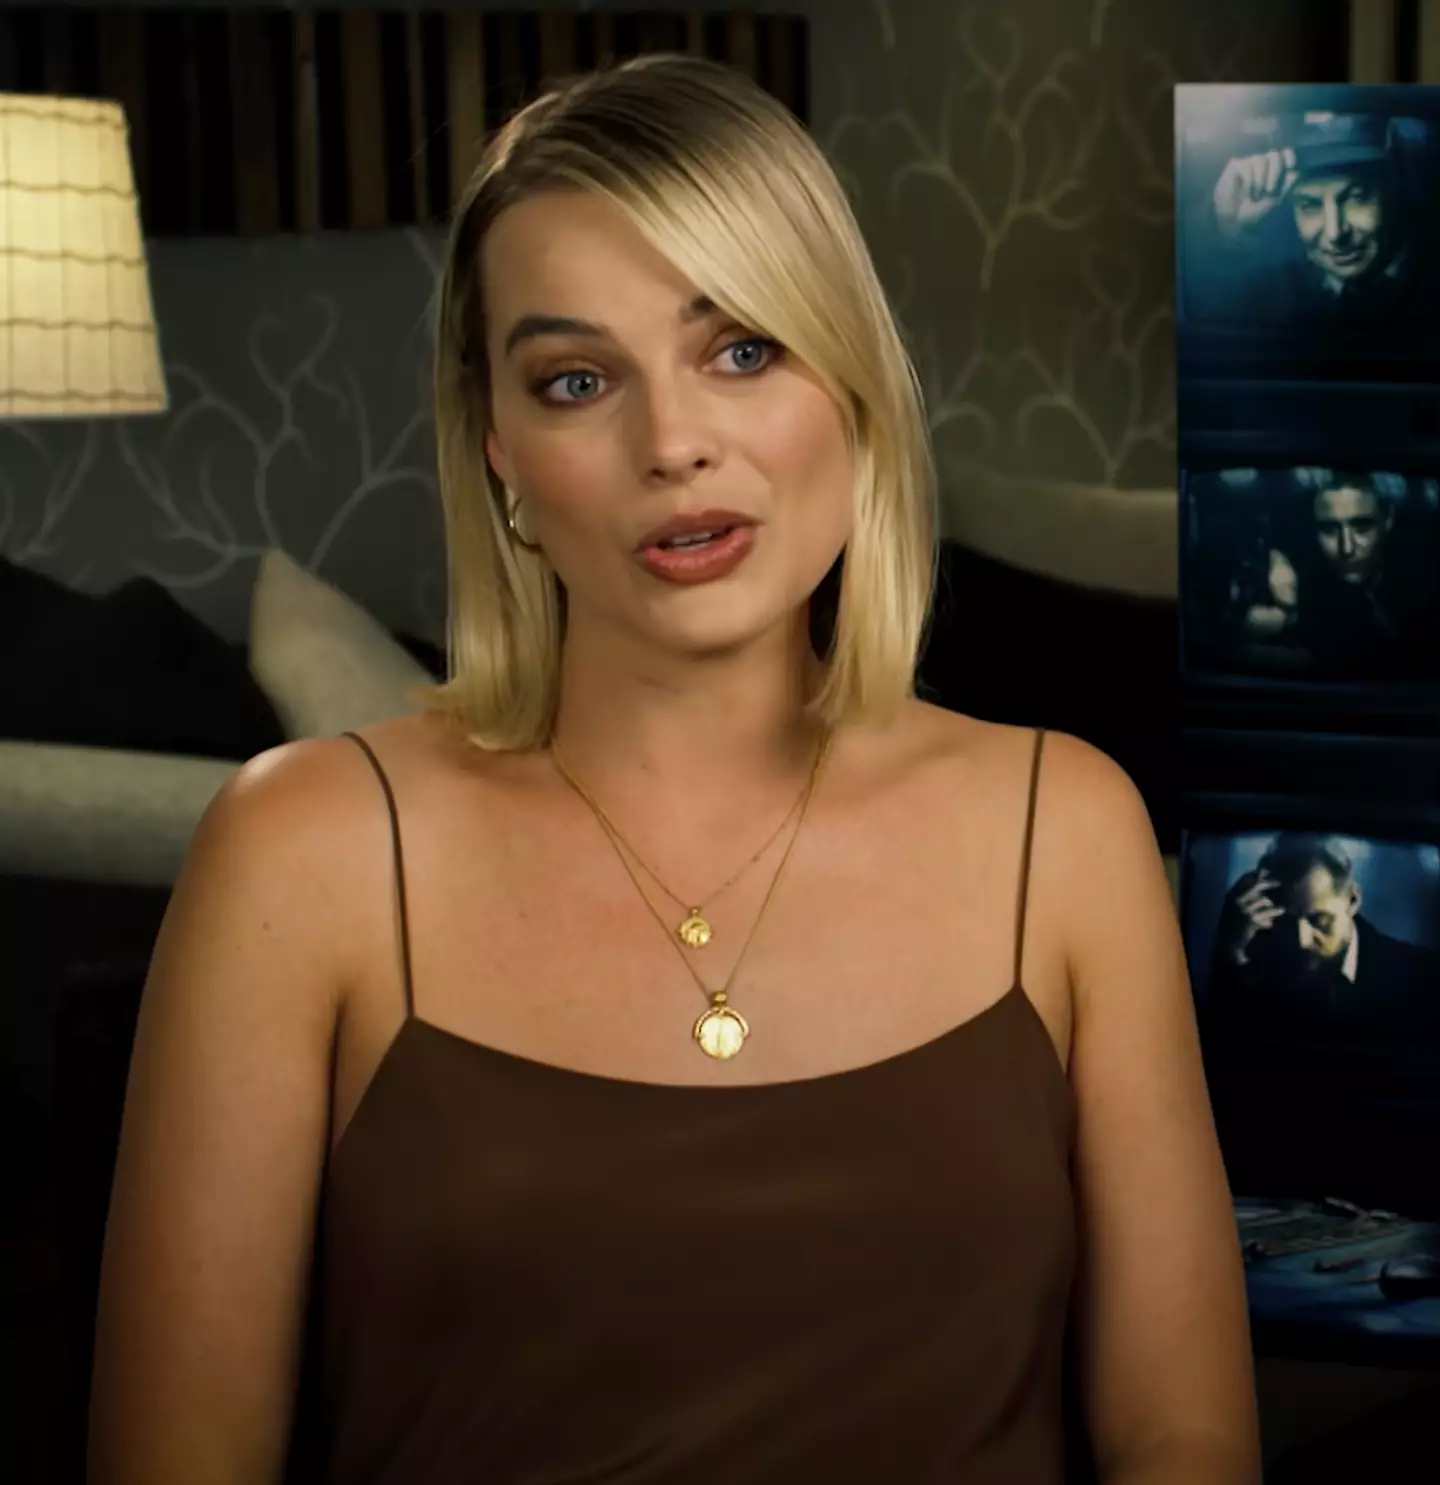 Margot Robbie has two celeb crushes you'd never expect.